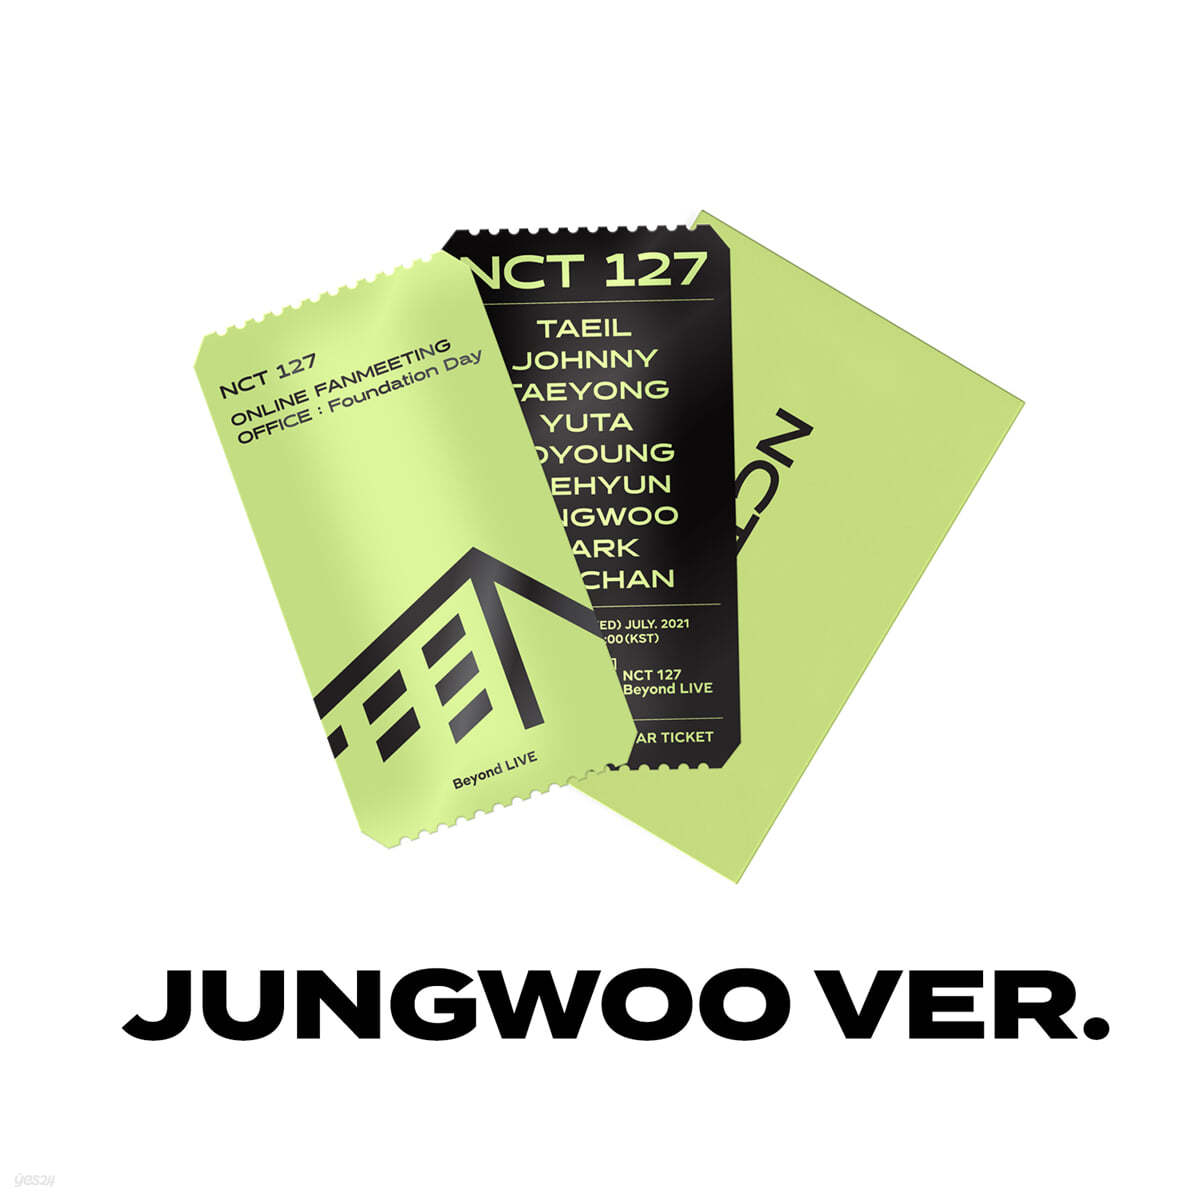 [JUNGWOO] SPECIAL AR TICKET SET Beyond LIVE - NCT 127 ONLINE FANMEETING 'OFFICE : Foundation Day'